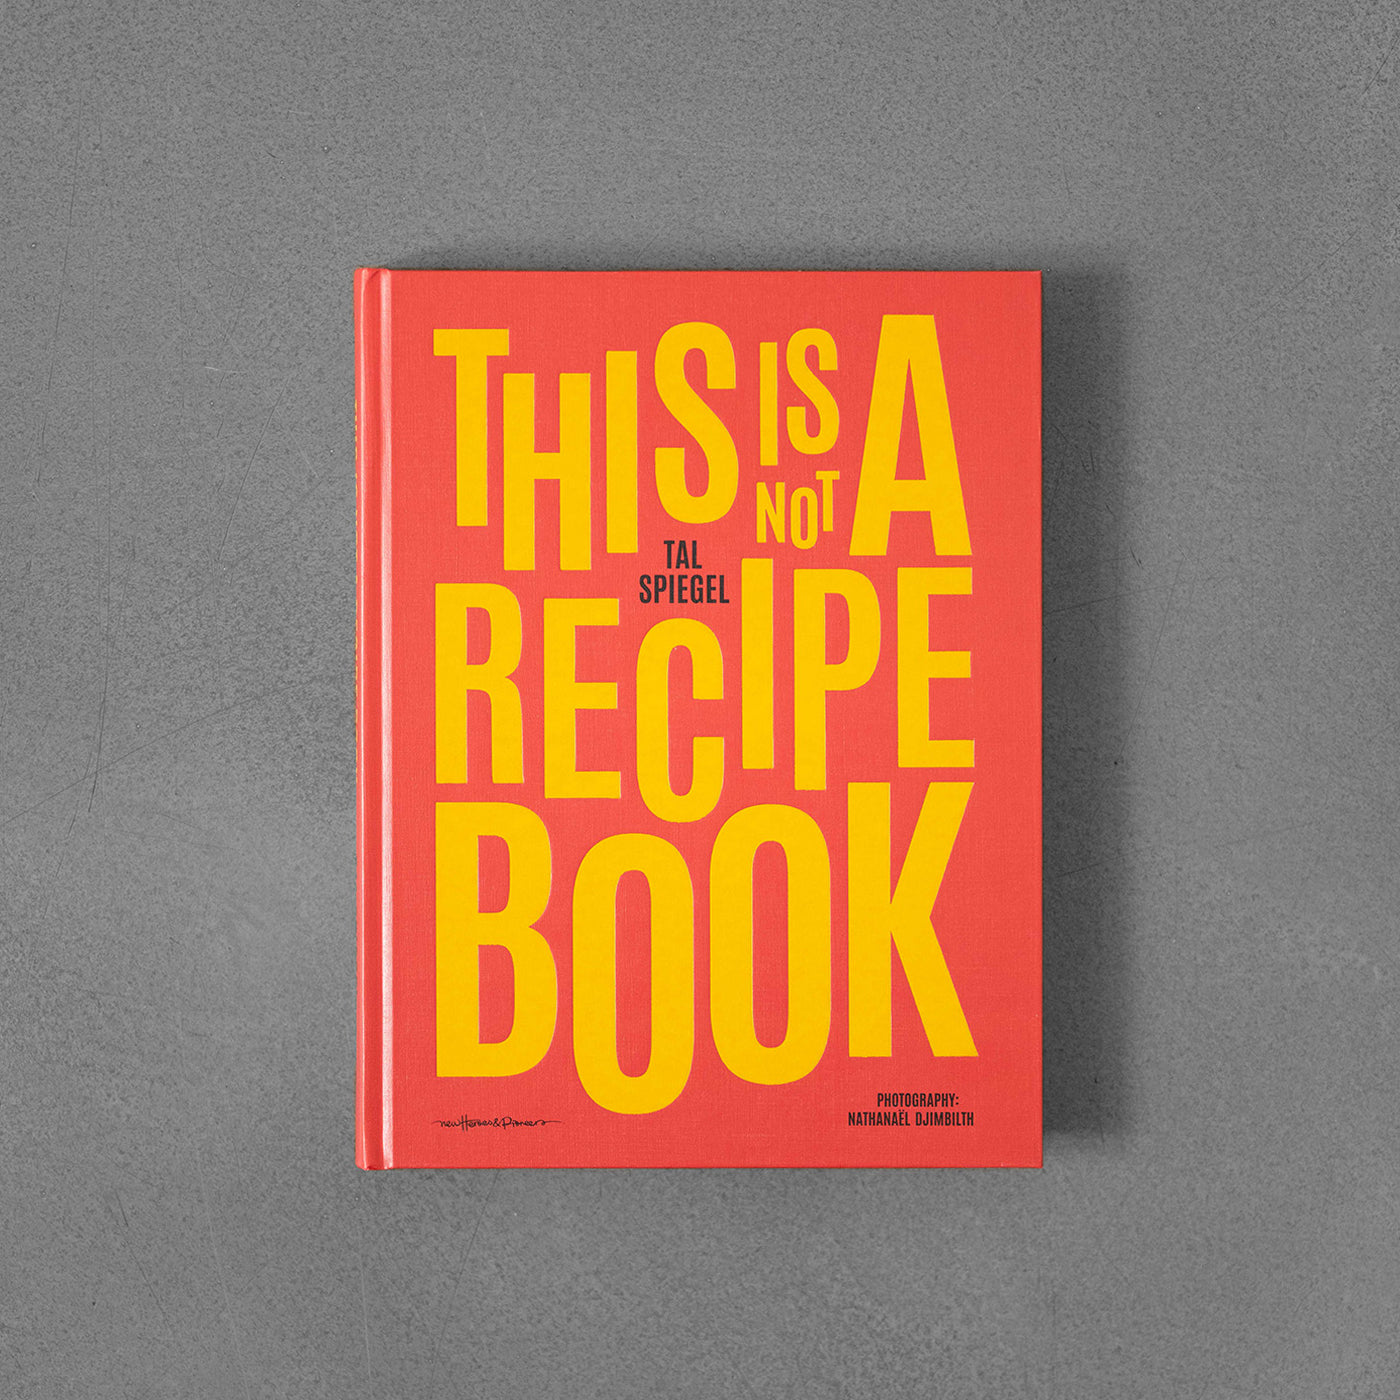 This is not a recipe book - Tal Spiegel